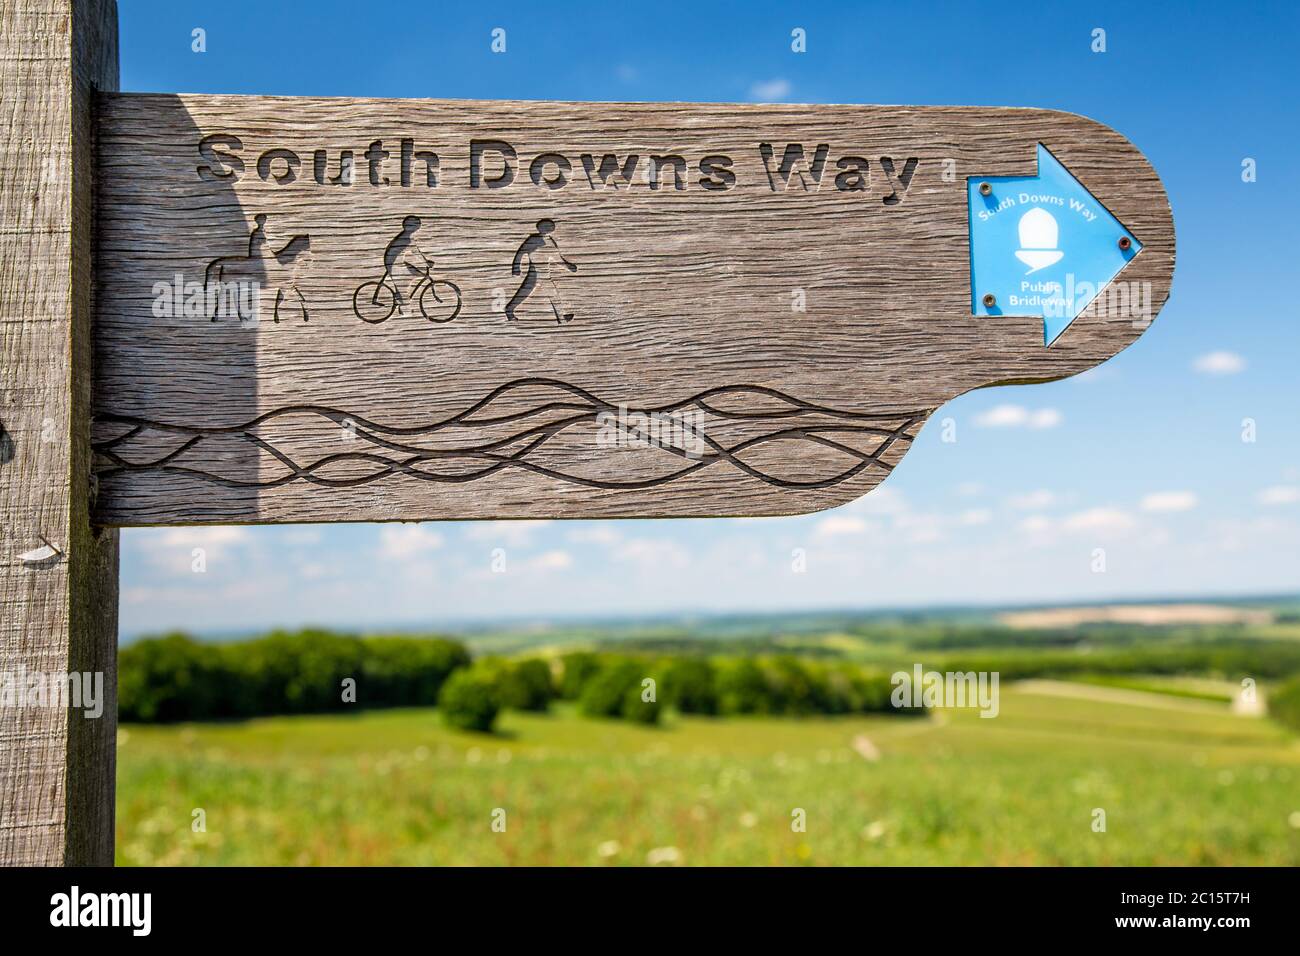 South Downs Way, cartello del National Park, Hampshire, Inghilterra Foto Stock